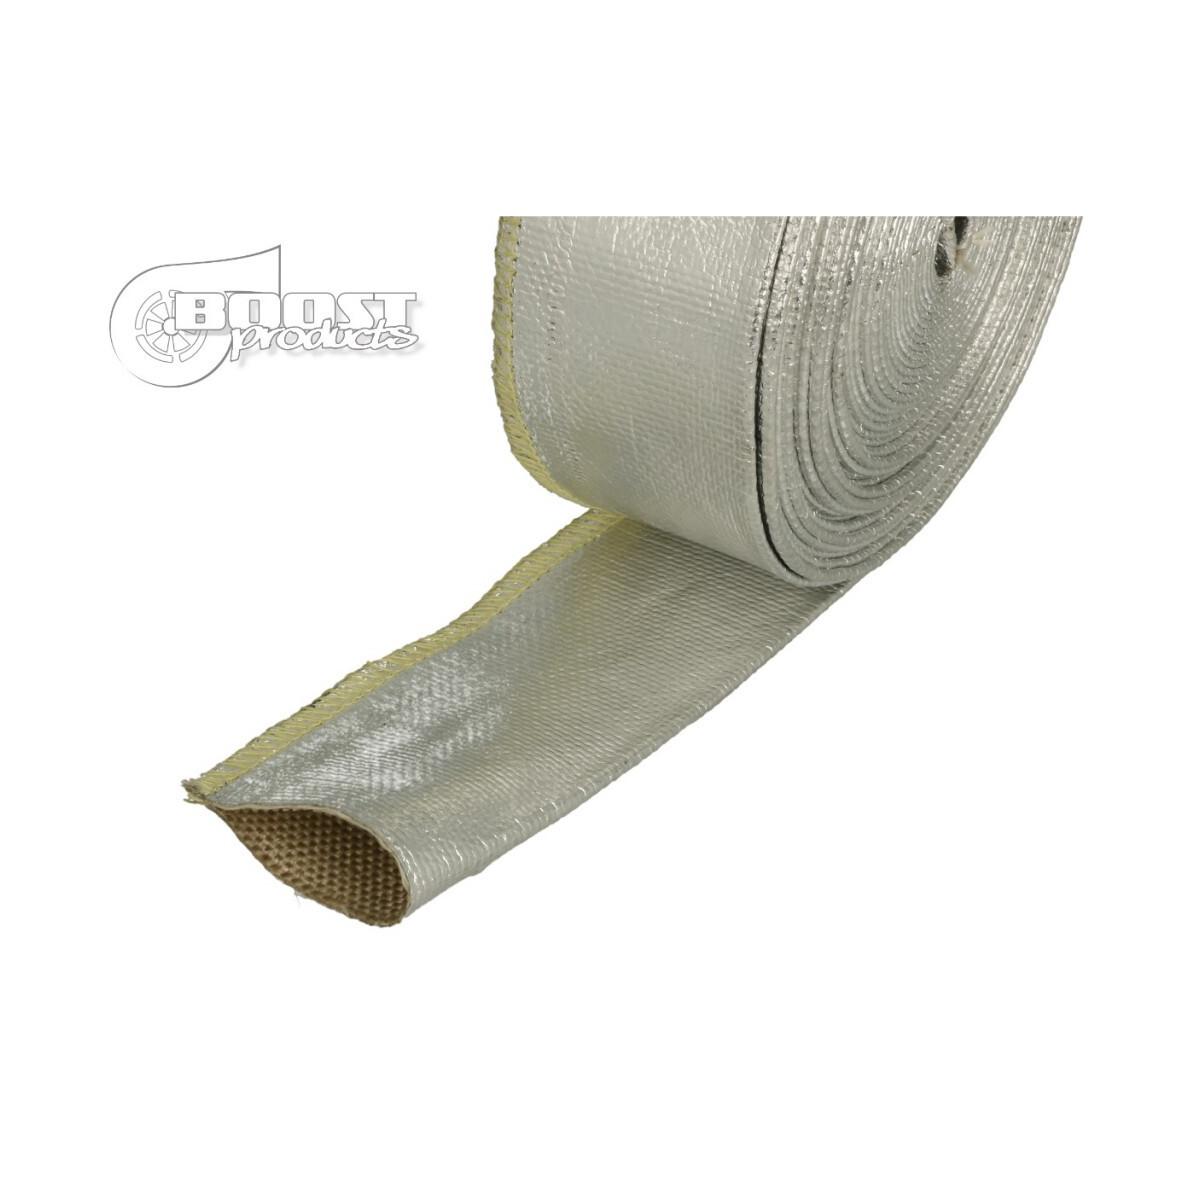 BOOST products 10m Heat Protection - Hose - Silver - 30mm diameter